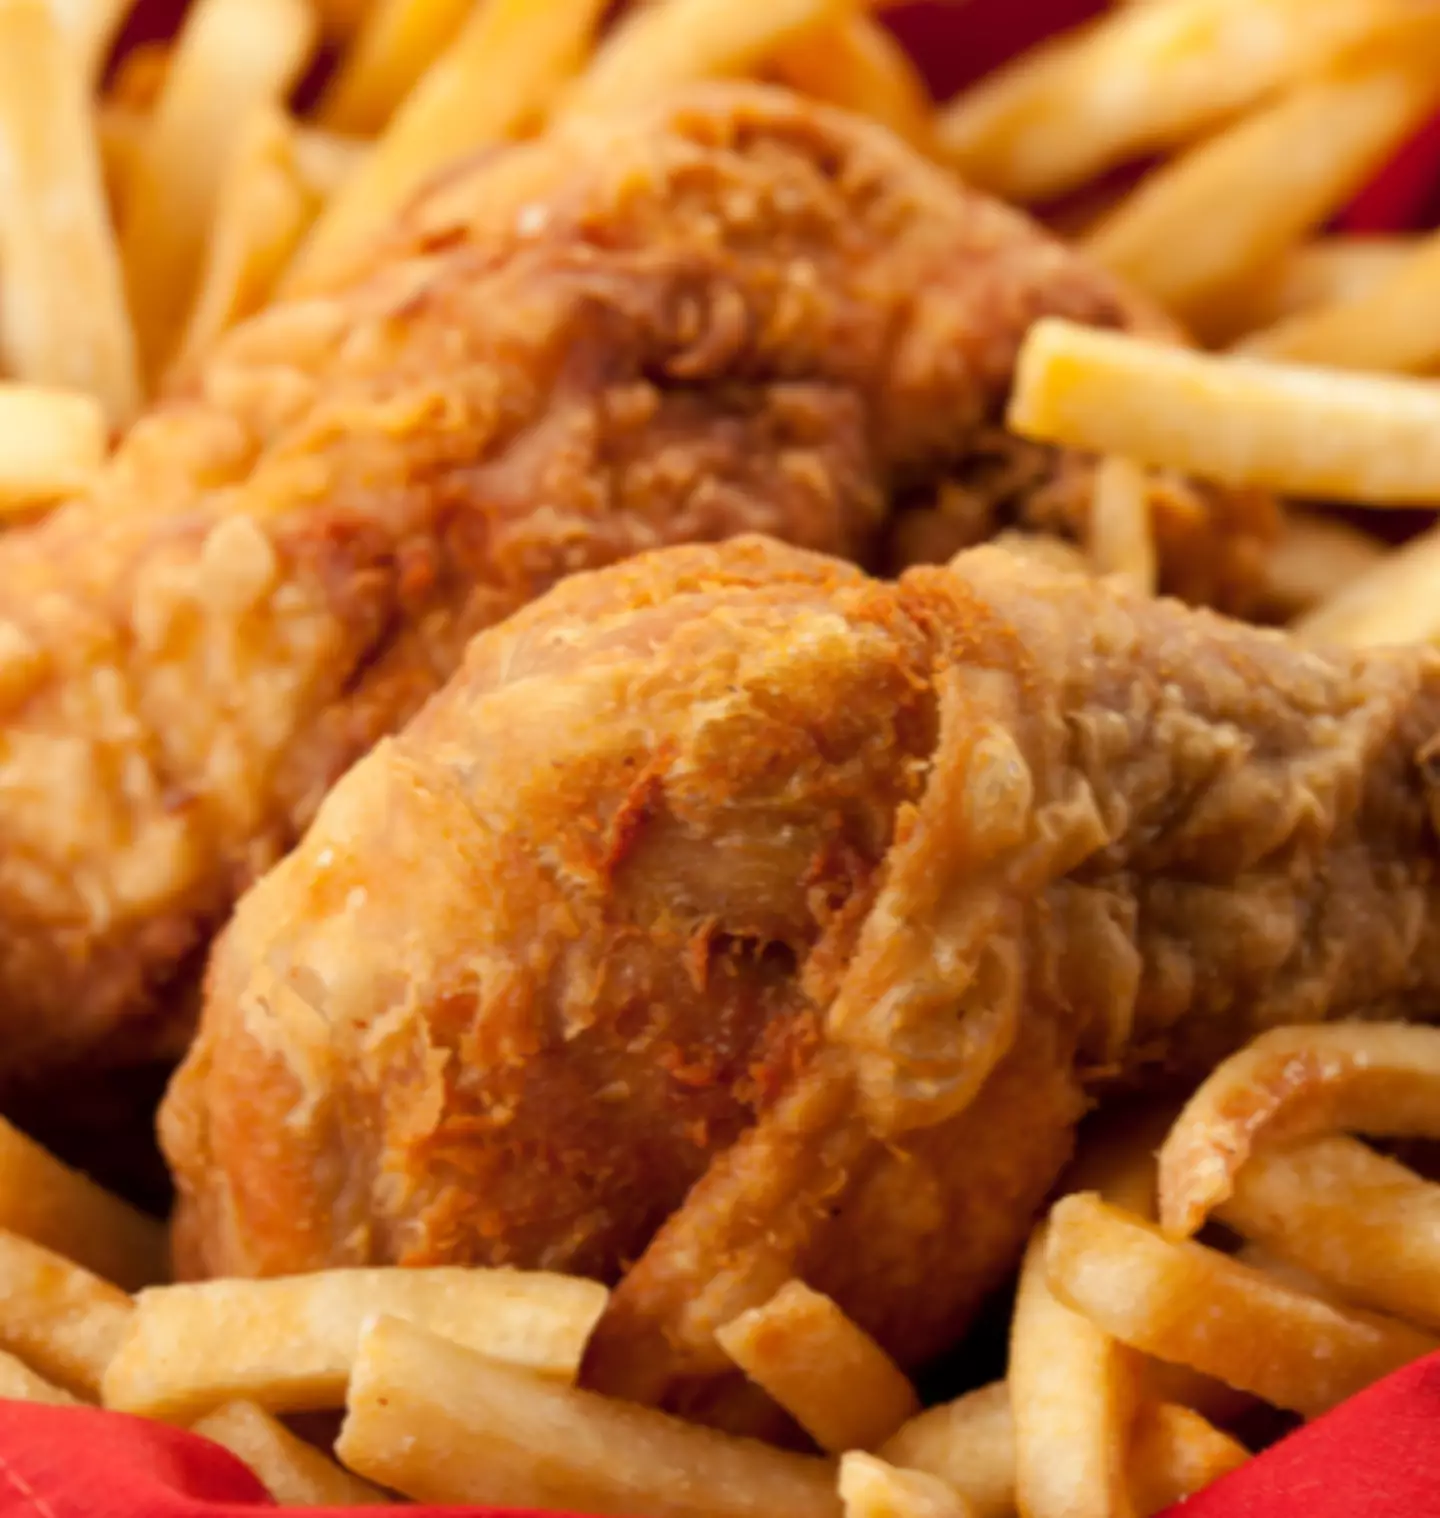 People slammed the woman's wedding plans to serve fried chicken.